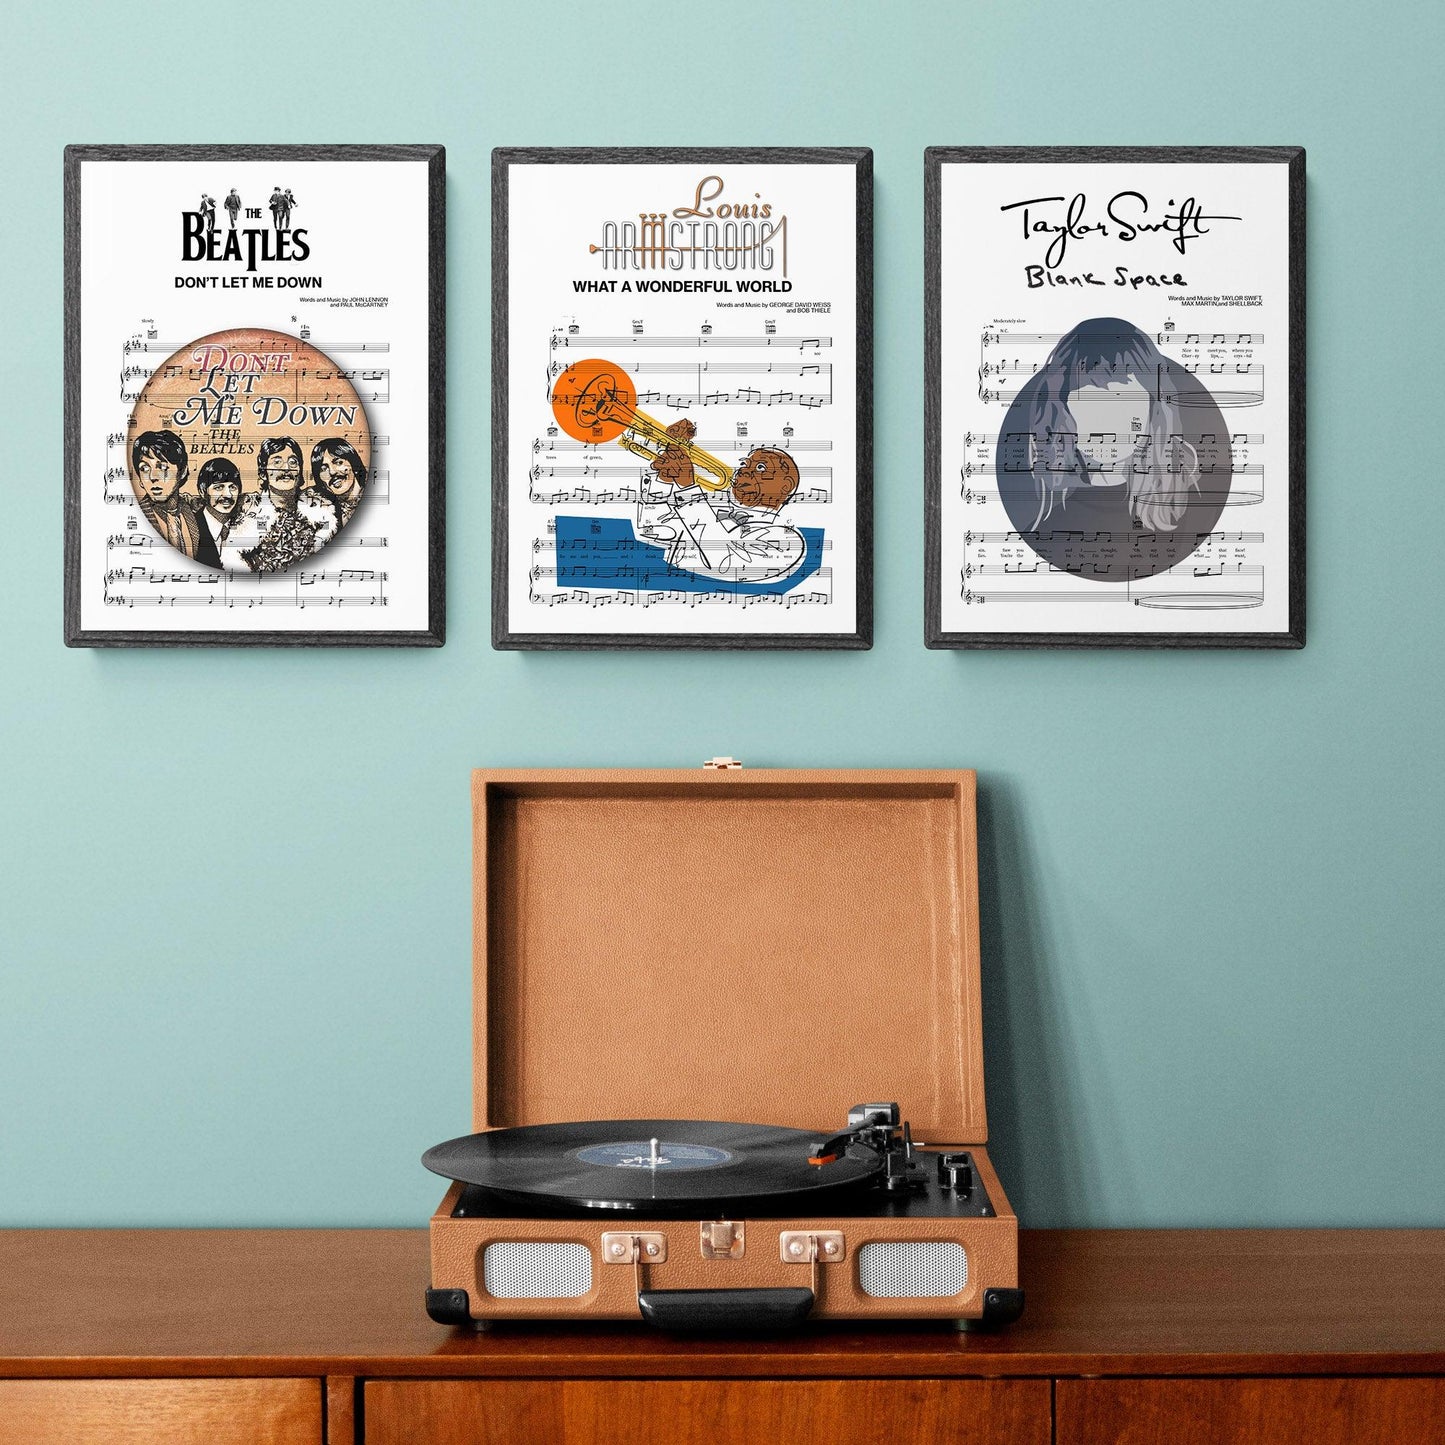 Print lyrical with these unusual and Natural High quality black and white musical scores with brightly coloured illustrations and quirky art print by artist Louis Armstrong to put on the wall of the room at home. A4 Posters uk By 98types art online.